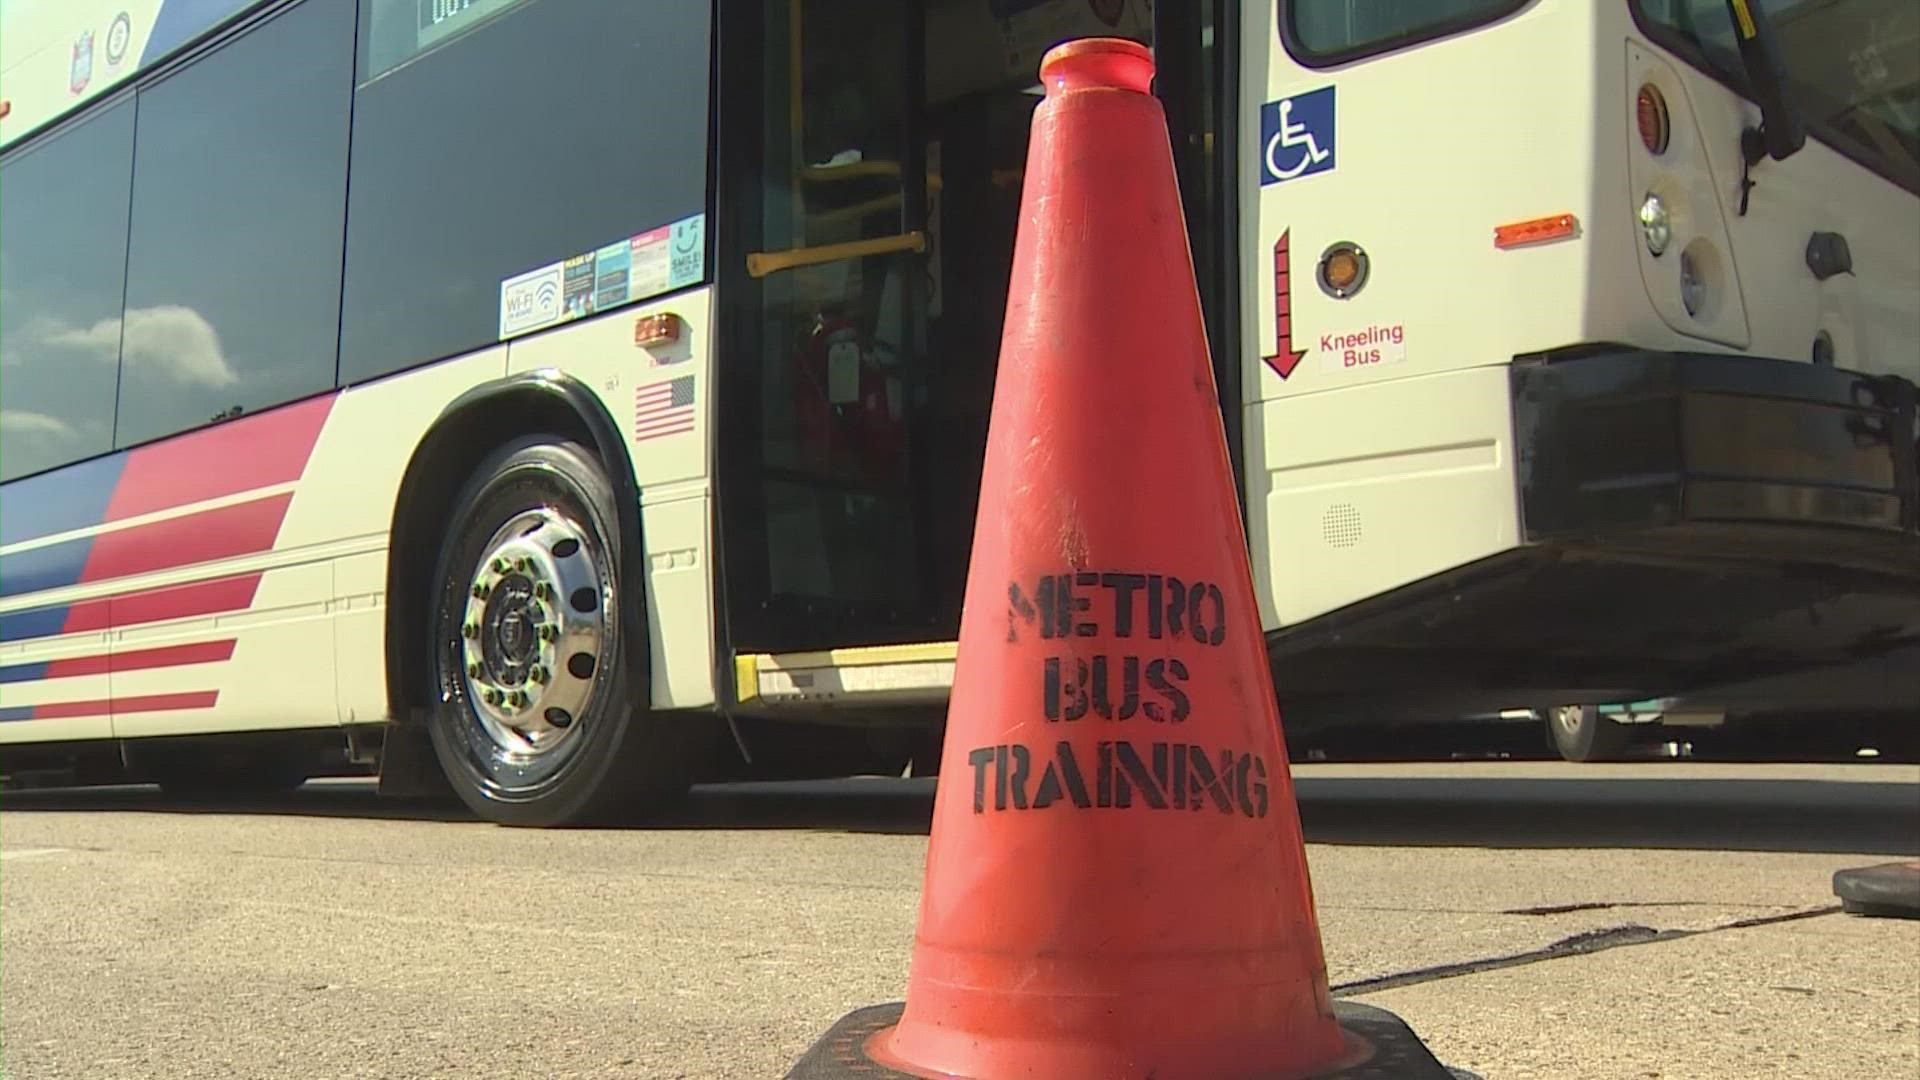 Houston METRO is looking to hire bus drivers and mechanics. The bus service is offering a $4000 incentive for bus drivers and an $8000 incentive for mechanics.